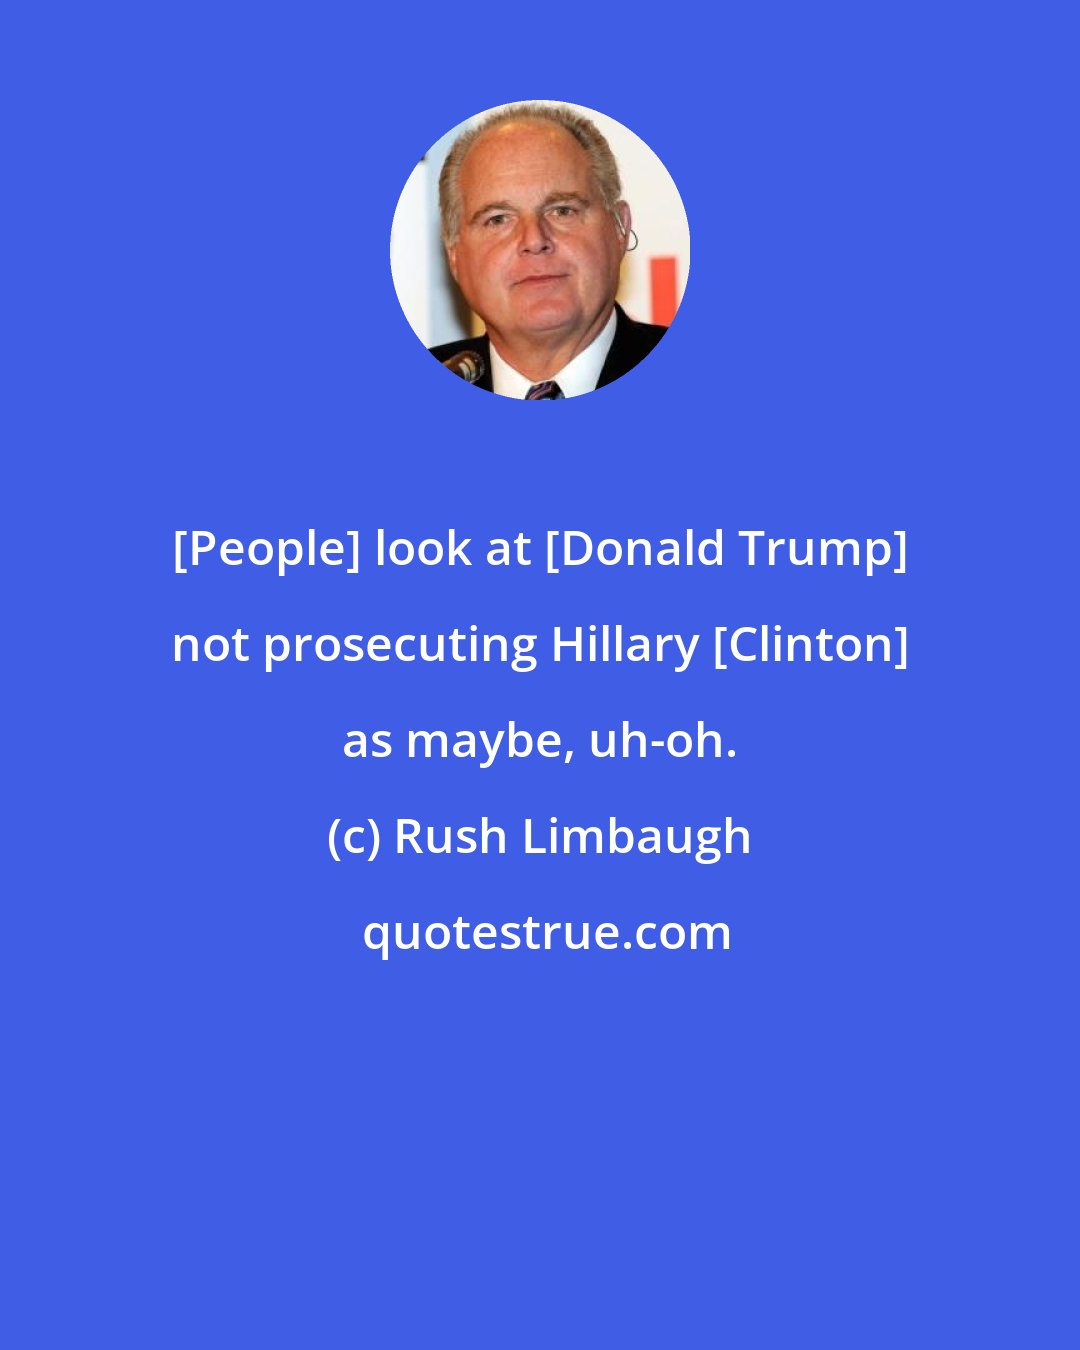 Rush Limbaugh: [People] look at [Donald Trump] not prosecuting Hillary [Clinton] as maybe, uh-oh.